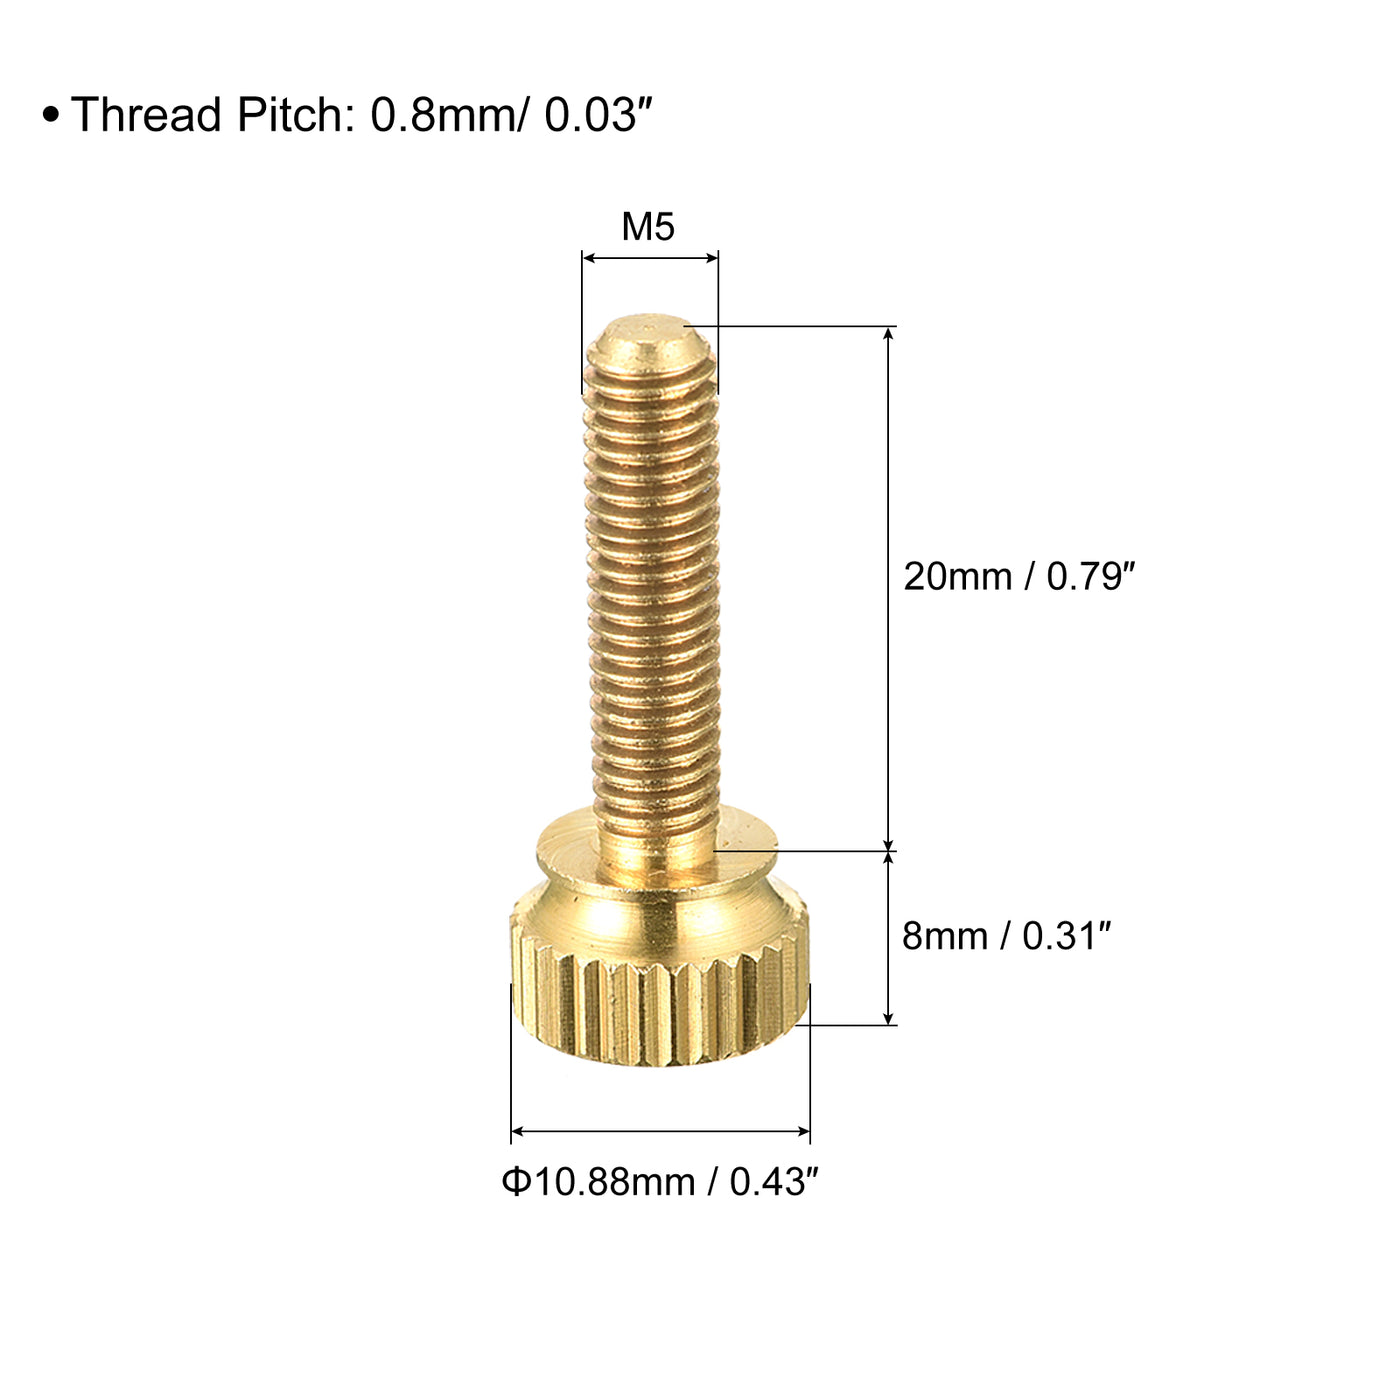 uxcell Uxcell 2Pcs Knurled Thumb Screws, M5x20mm Brass Shoulder Bolts Stepped Grip Knobs Fasteners for PC, Electronic, Mechanical